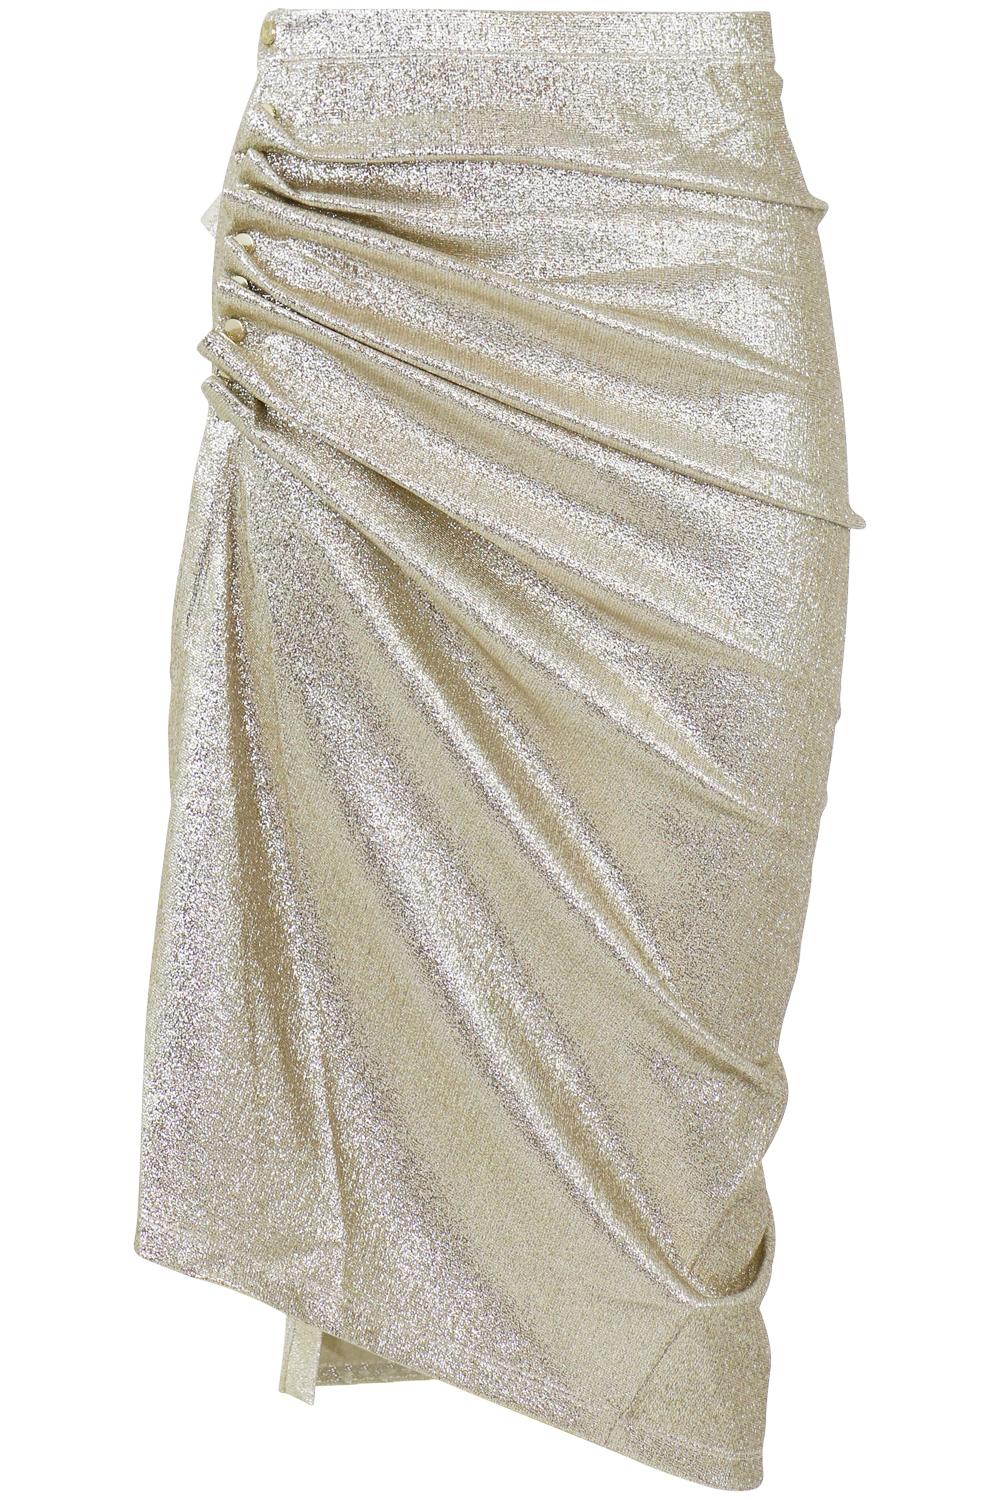 Paco Rabanne Asymmetric Ruched Skirt Gold in Metallic - Lyst